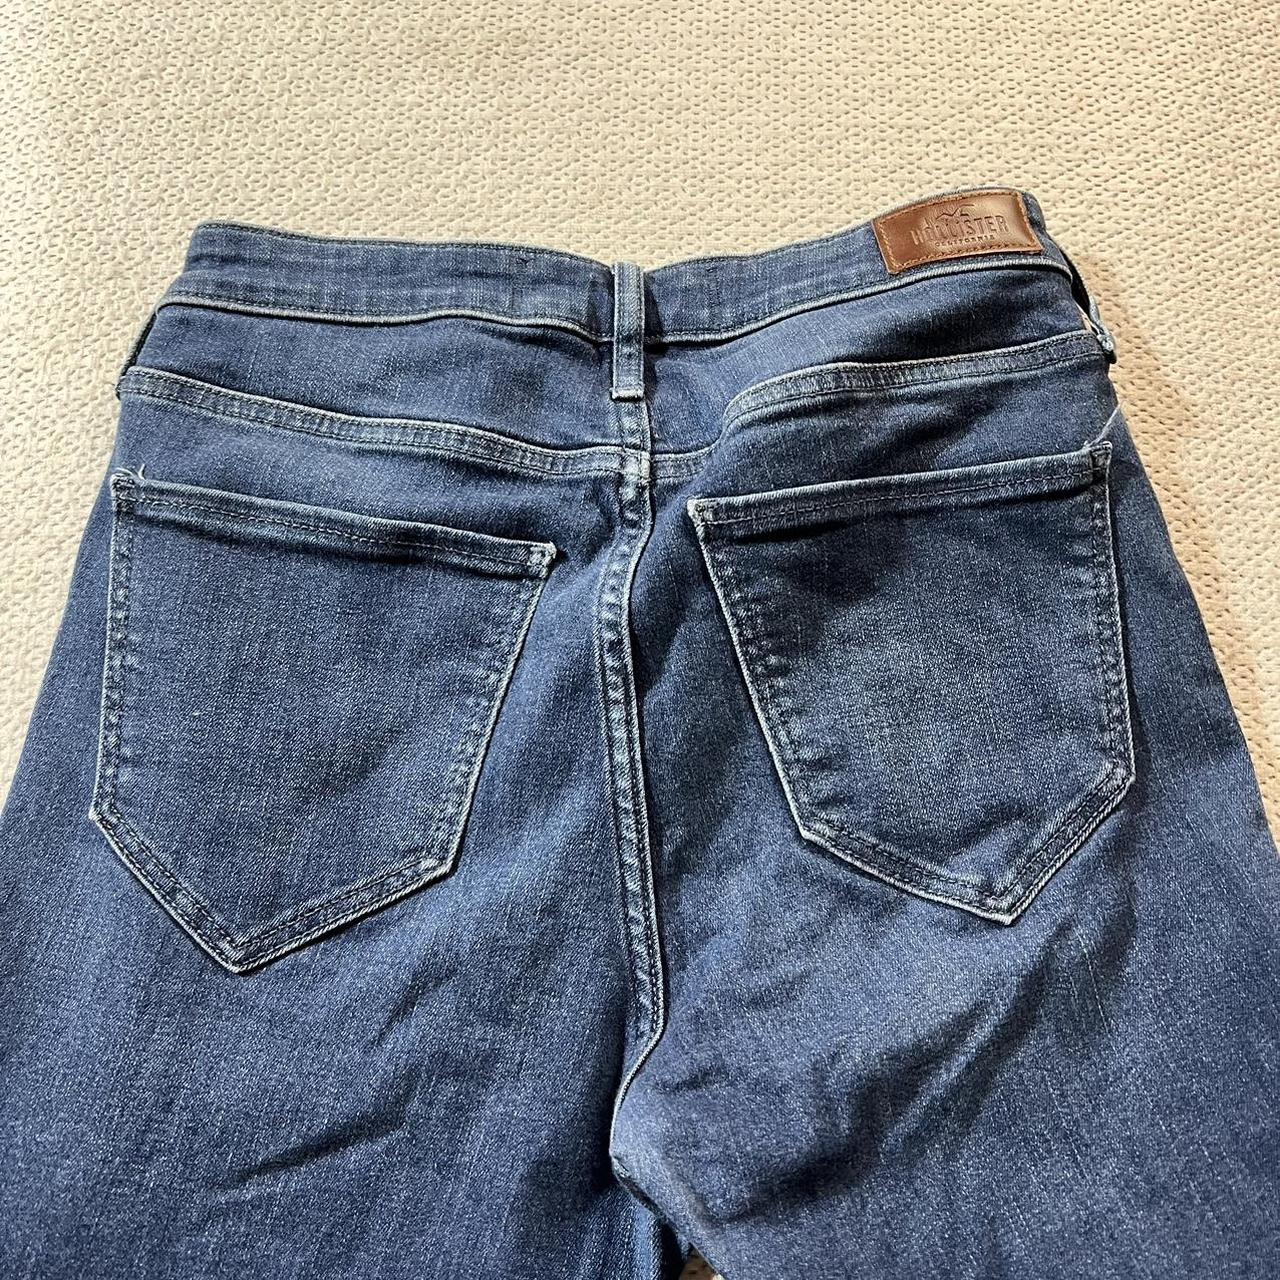 BRAND NEW FLARE JEANS hollister high-rise-flare - Depop